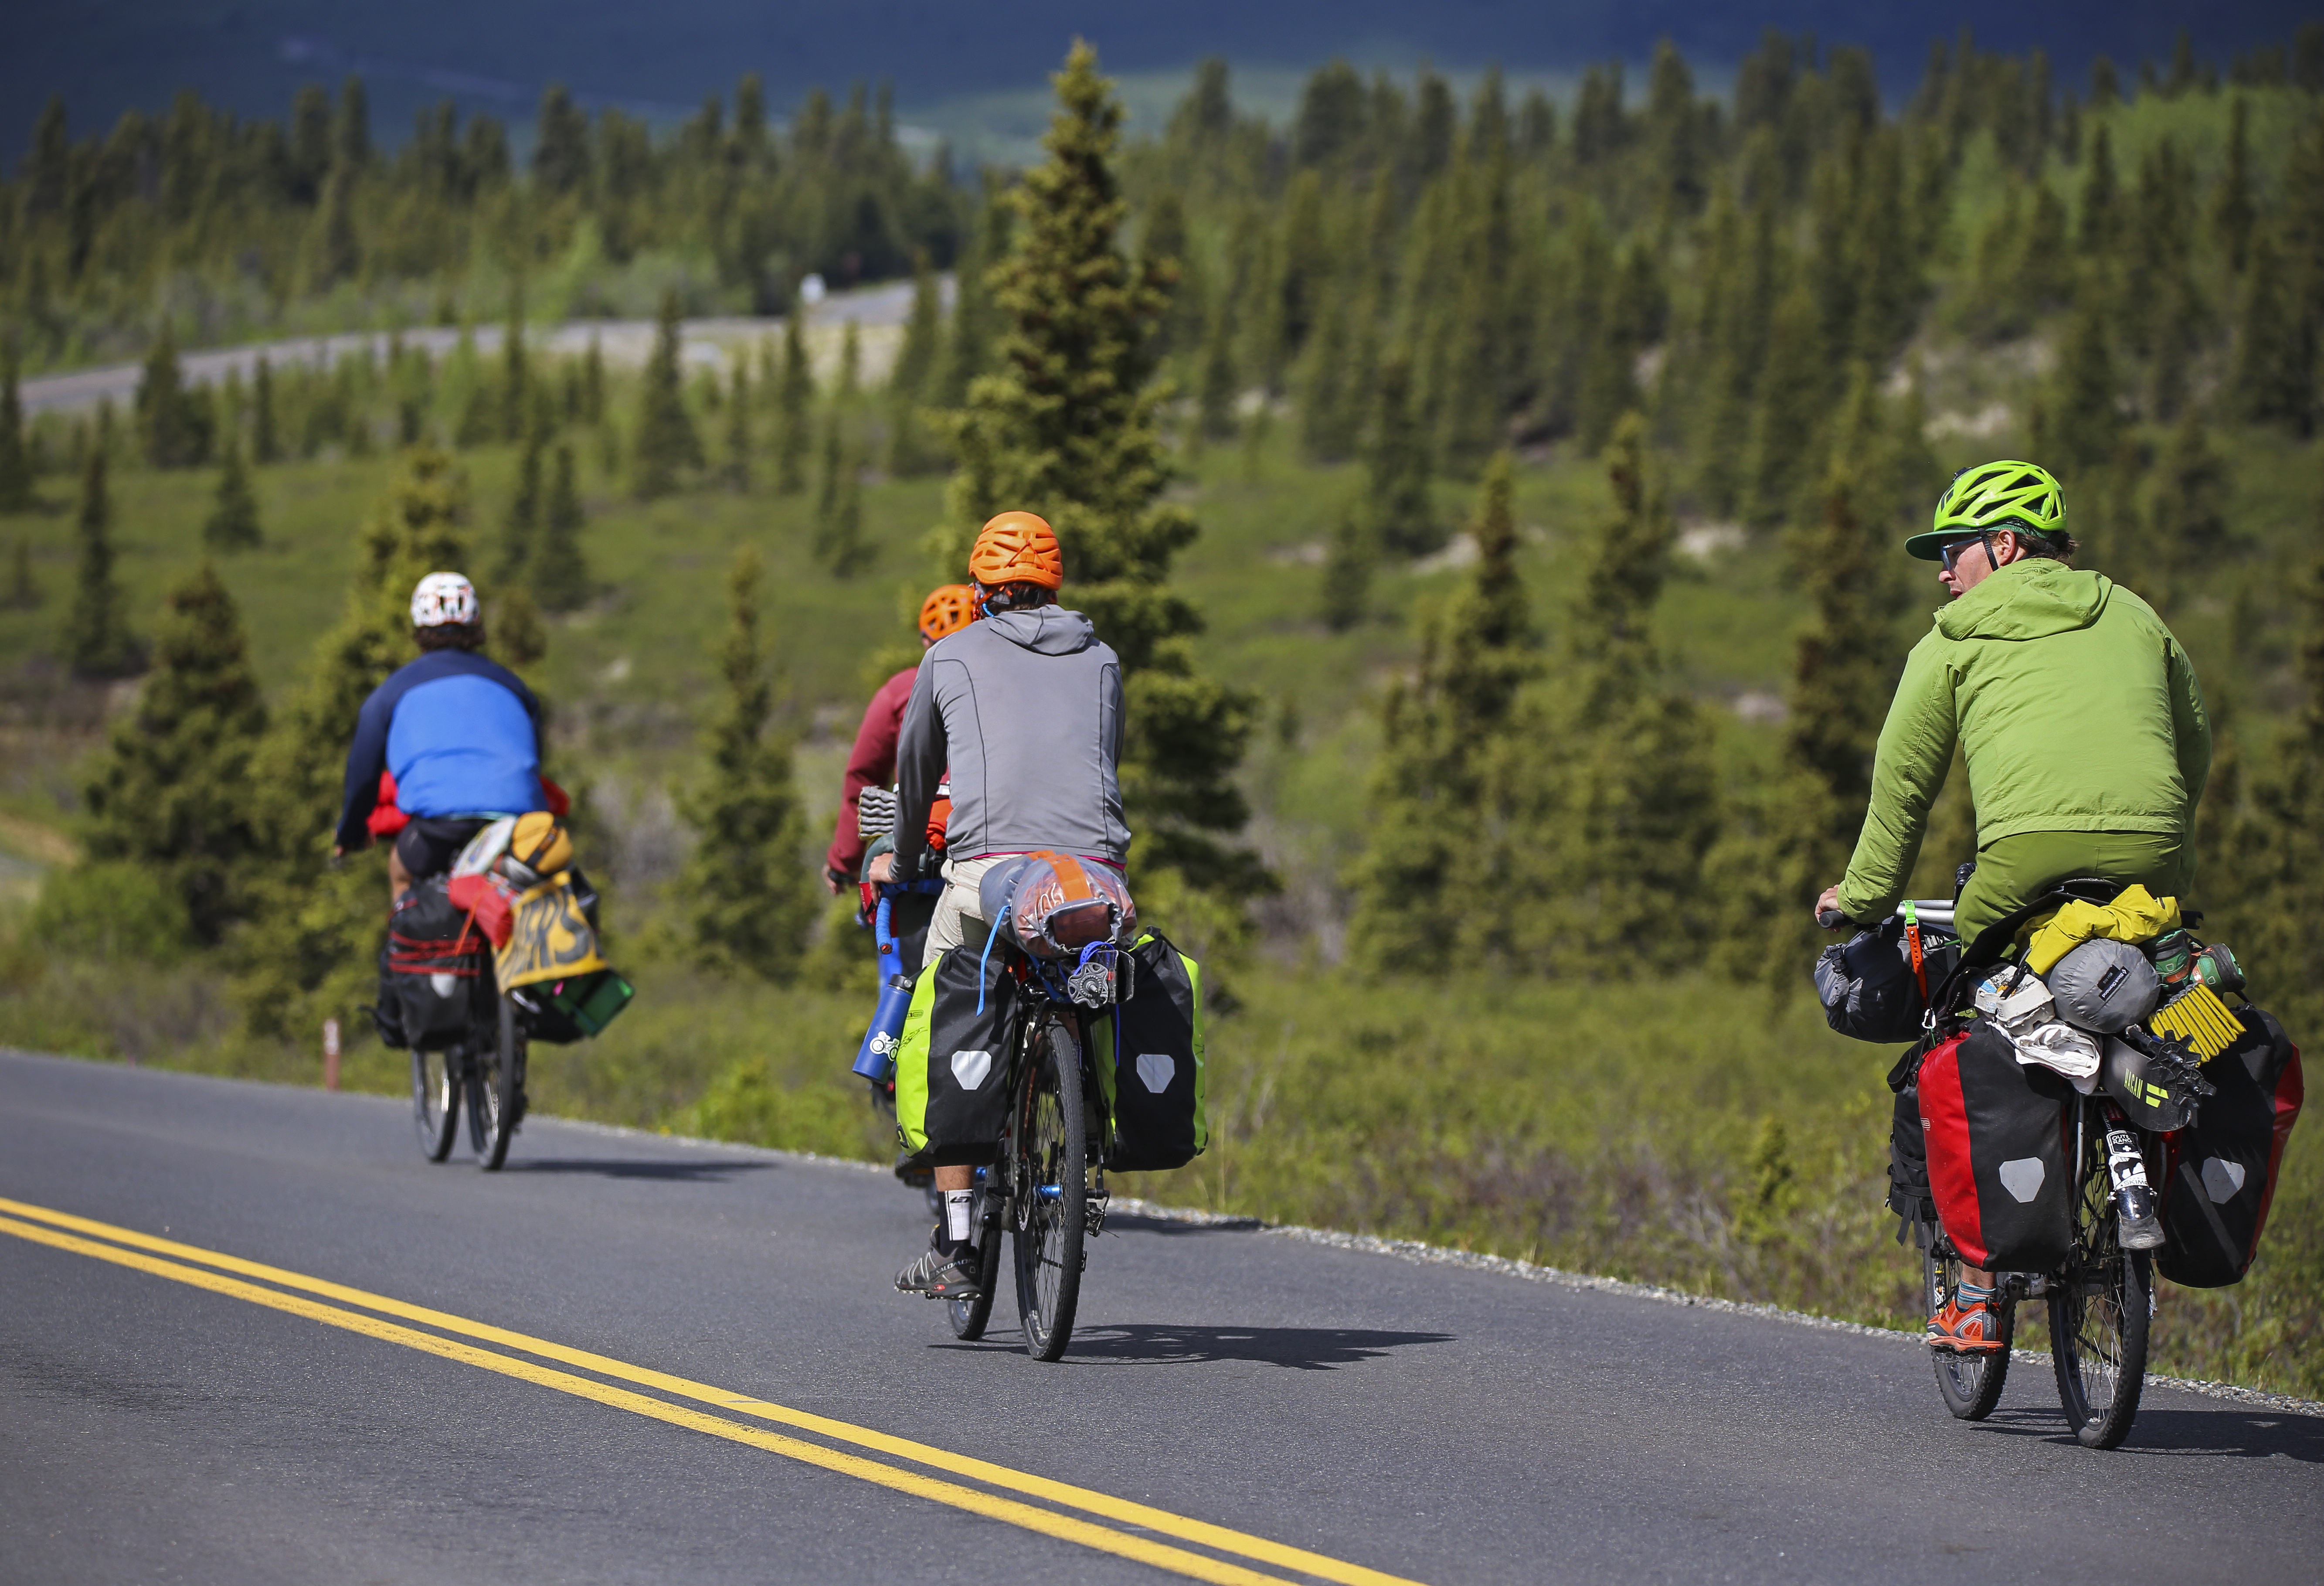 Four bikers with packs attached to their bikes, bike down a paved road surrounded by a forest.